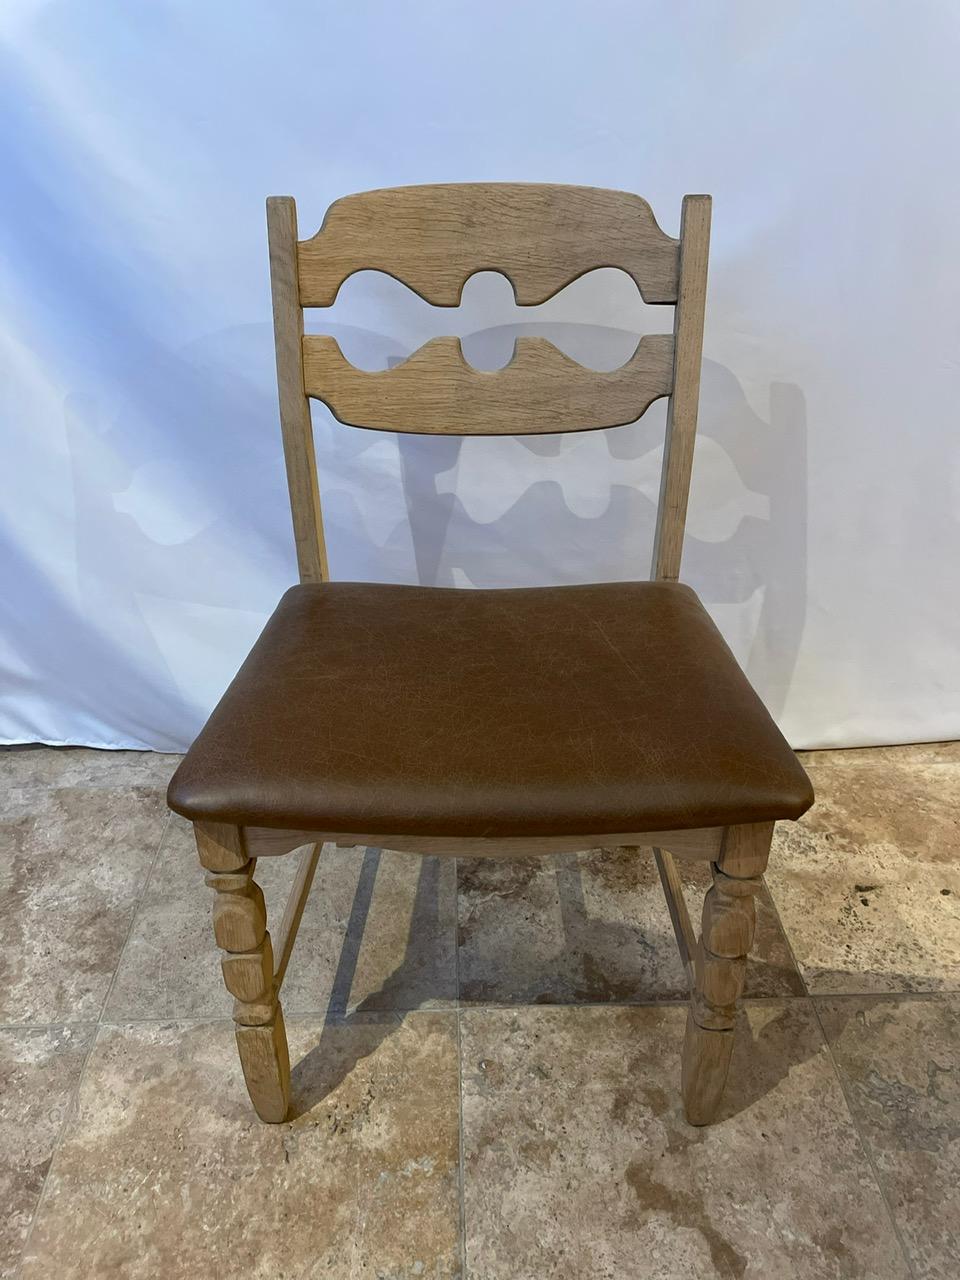 Oak dining chairs by Henning/Henry Kjaernulf.

Denmark, c1960s.

''Razor back'' or ''Razor blade'' model.

Generally good condition for the wood, some wear and scuffs commensurate with age.

New high quality brown leather available as per